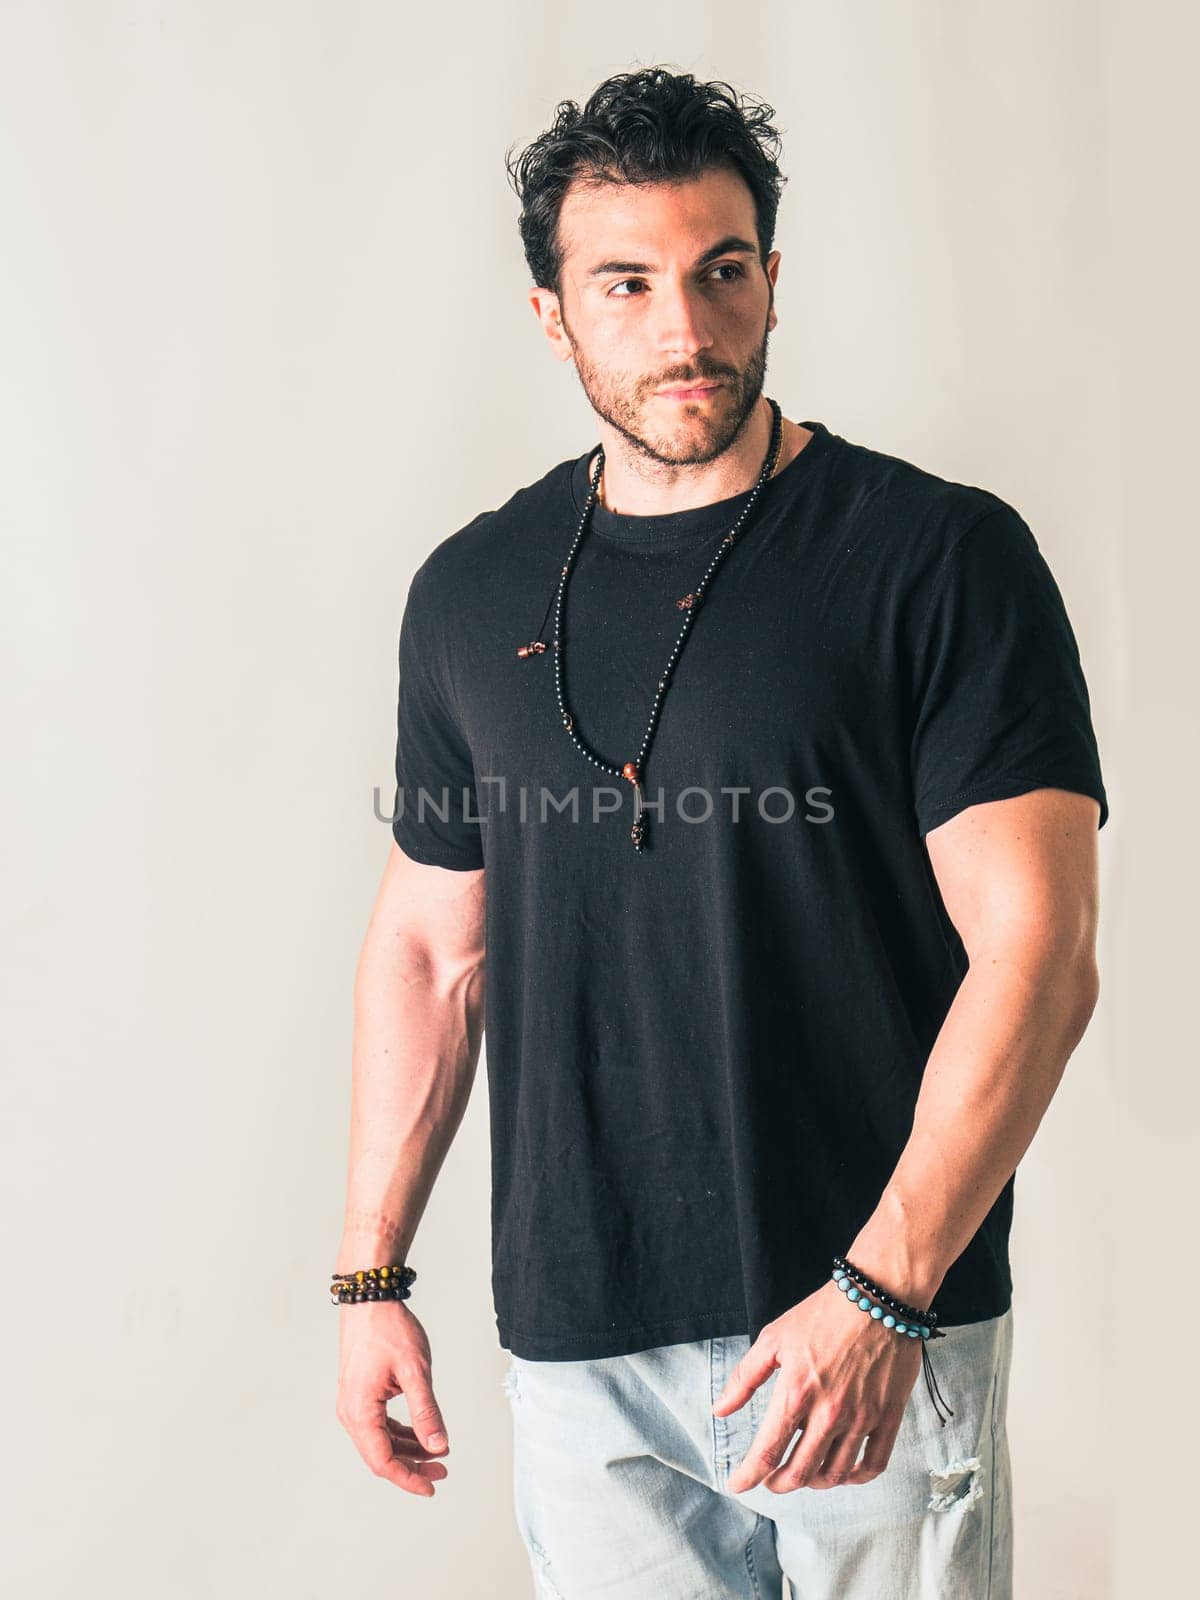 A Stylish Man in a Black Shirt Strikes a Pose for a Captivating Photograph by artofphoto